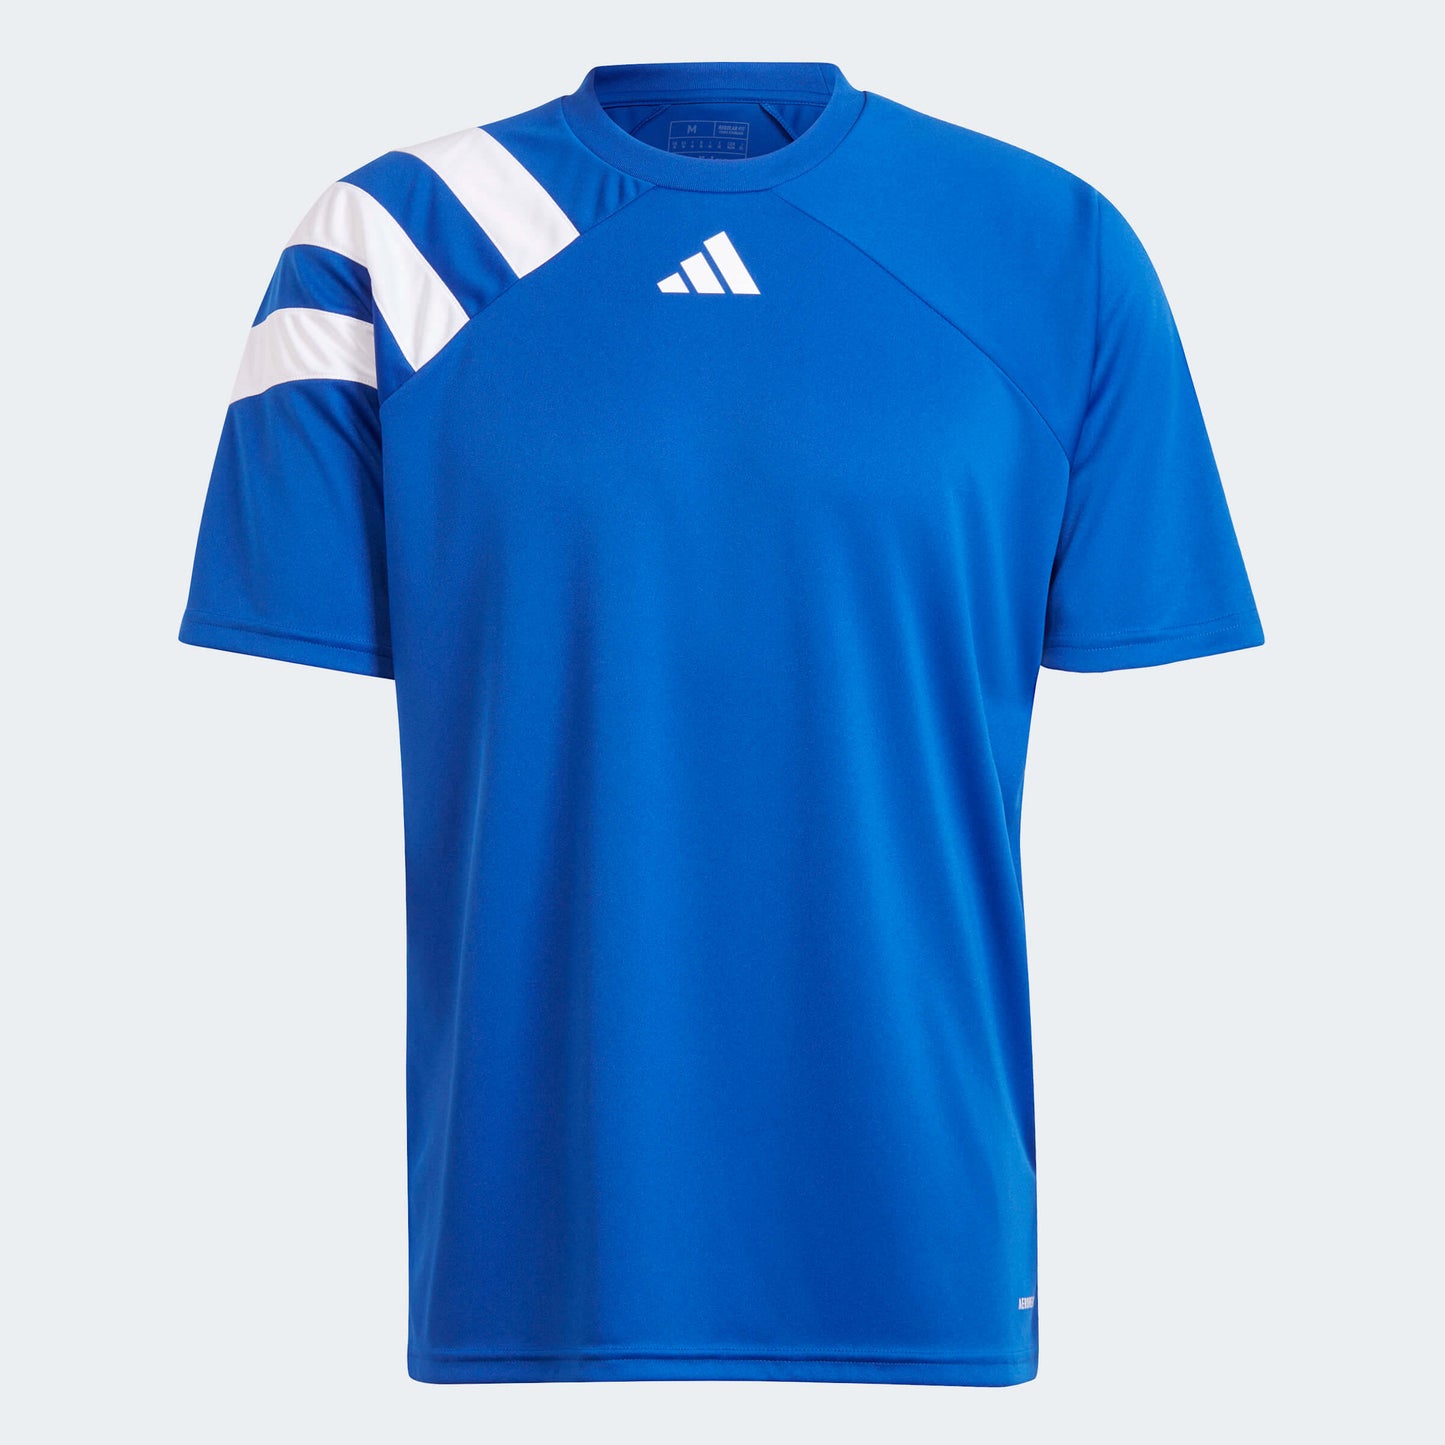 adidas Fortore 23 Jersey Team Royal Blue-White (Front)